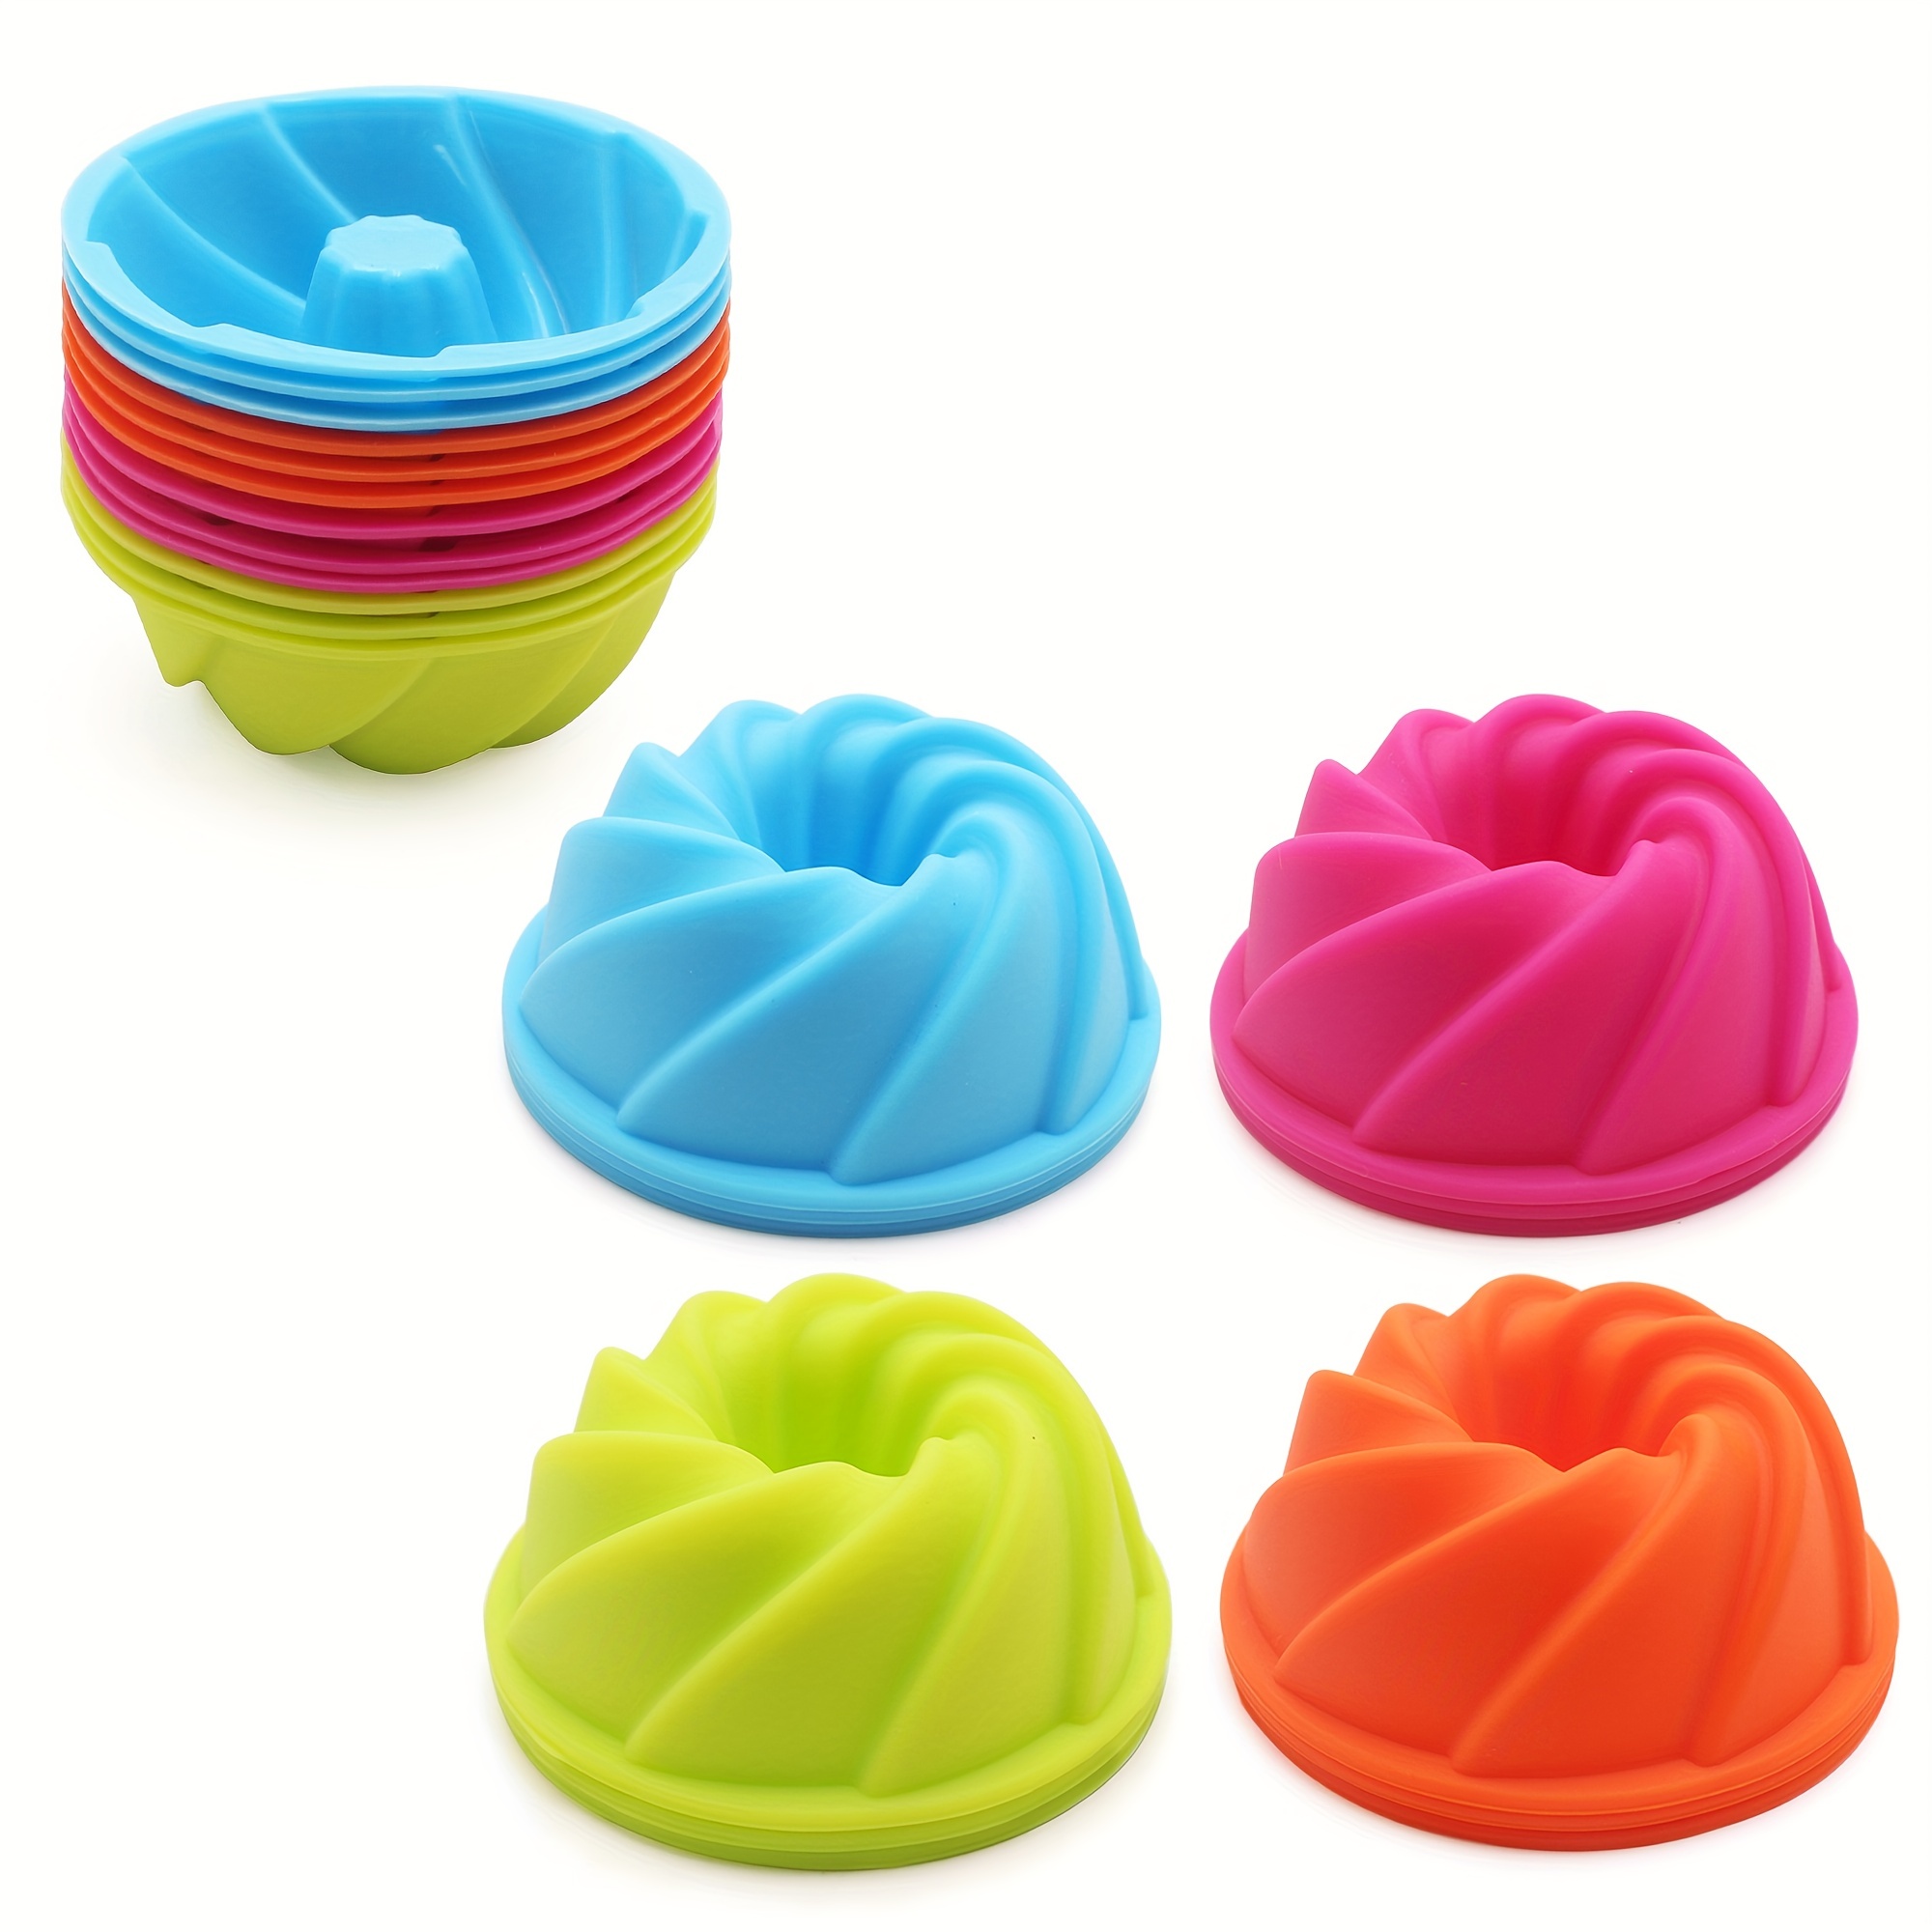 Mini Fluted Tube Silicone Baking Molds/Cake Cups, Fits Standard Muffin/Cupcake Pans, 16-Count